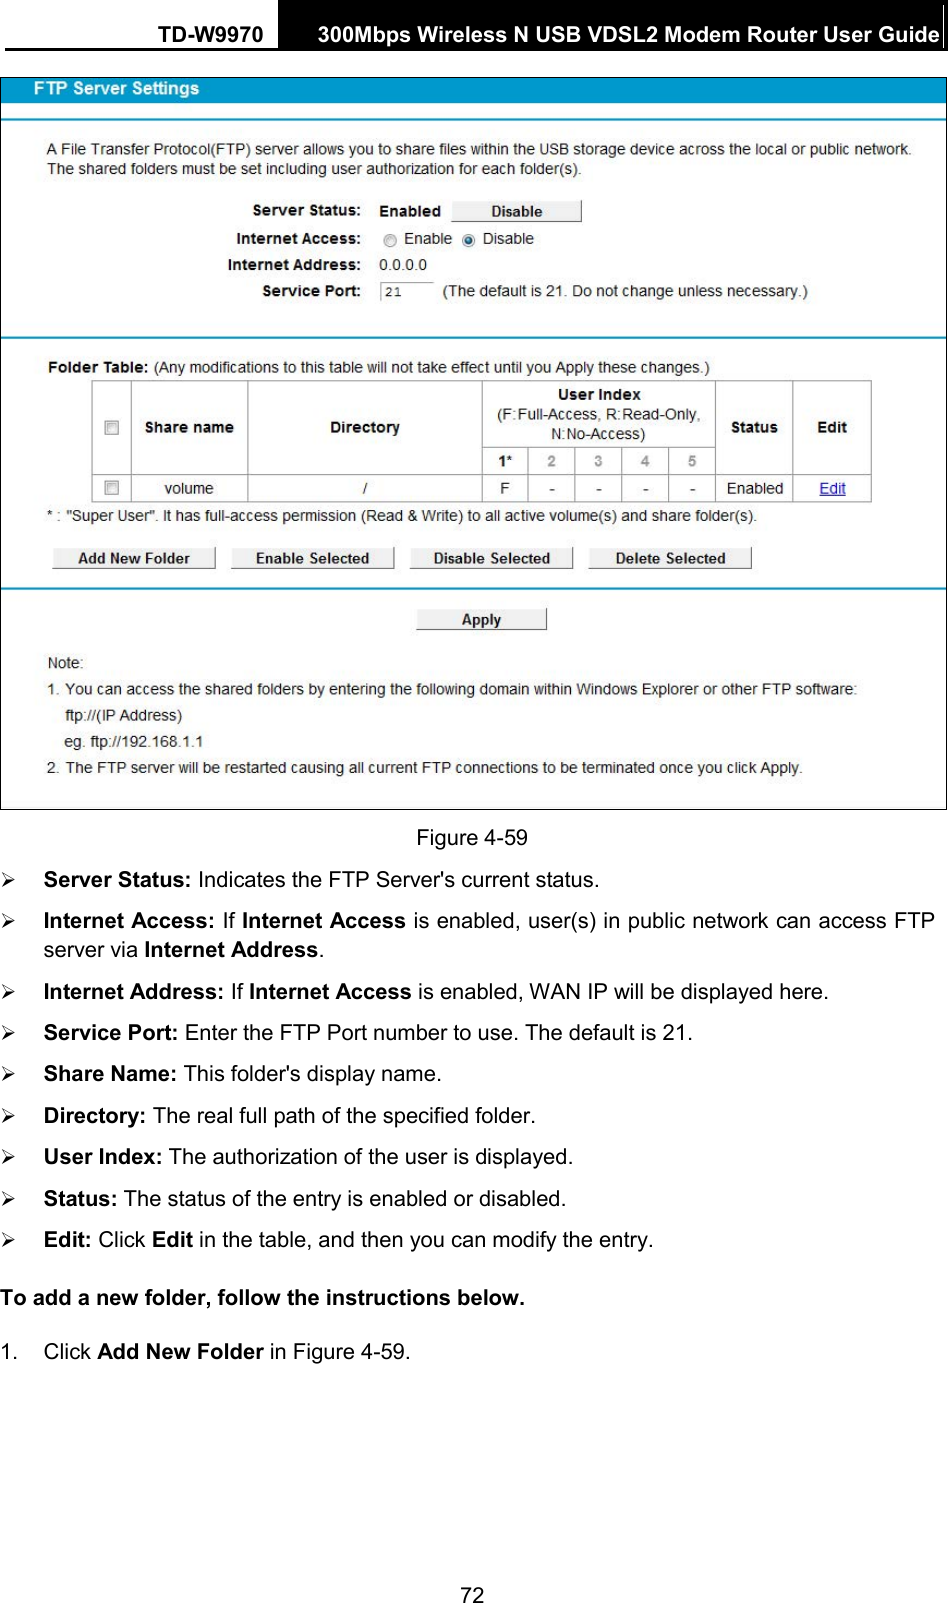 TD-W9970 300Mbps Wireless N USB VDSL2 Modem Router User Guide   Figure 4-59  Server Status: Indicates the FTP Server&apos;s current status.  Internet Access: If Internet Access is enabled, user(s) in public network can access FTP server via Internet Address.  Internet Address: If Internet Access is enabled, WAN IP will be displayed here.    Service Port: Enter the FTP Port number to use. The default is 21.    Share Name: This folder&apos;s display name.   Directory: The real full path of the specified folder.  User Index: The authorization of the user is displayed.    Status: The status of the entry is enabled or disabled.  Edit: Click Edit in the table, and then you can modify the entry.     To add a new folder, follow the instructions below. 1. Click Add New Folder in Figure 4-59. 72 